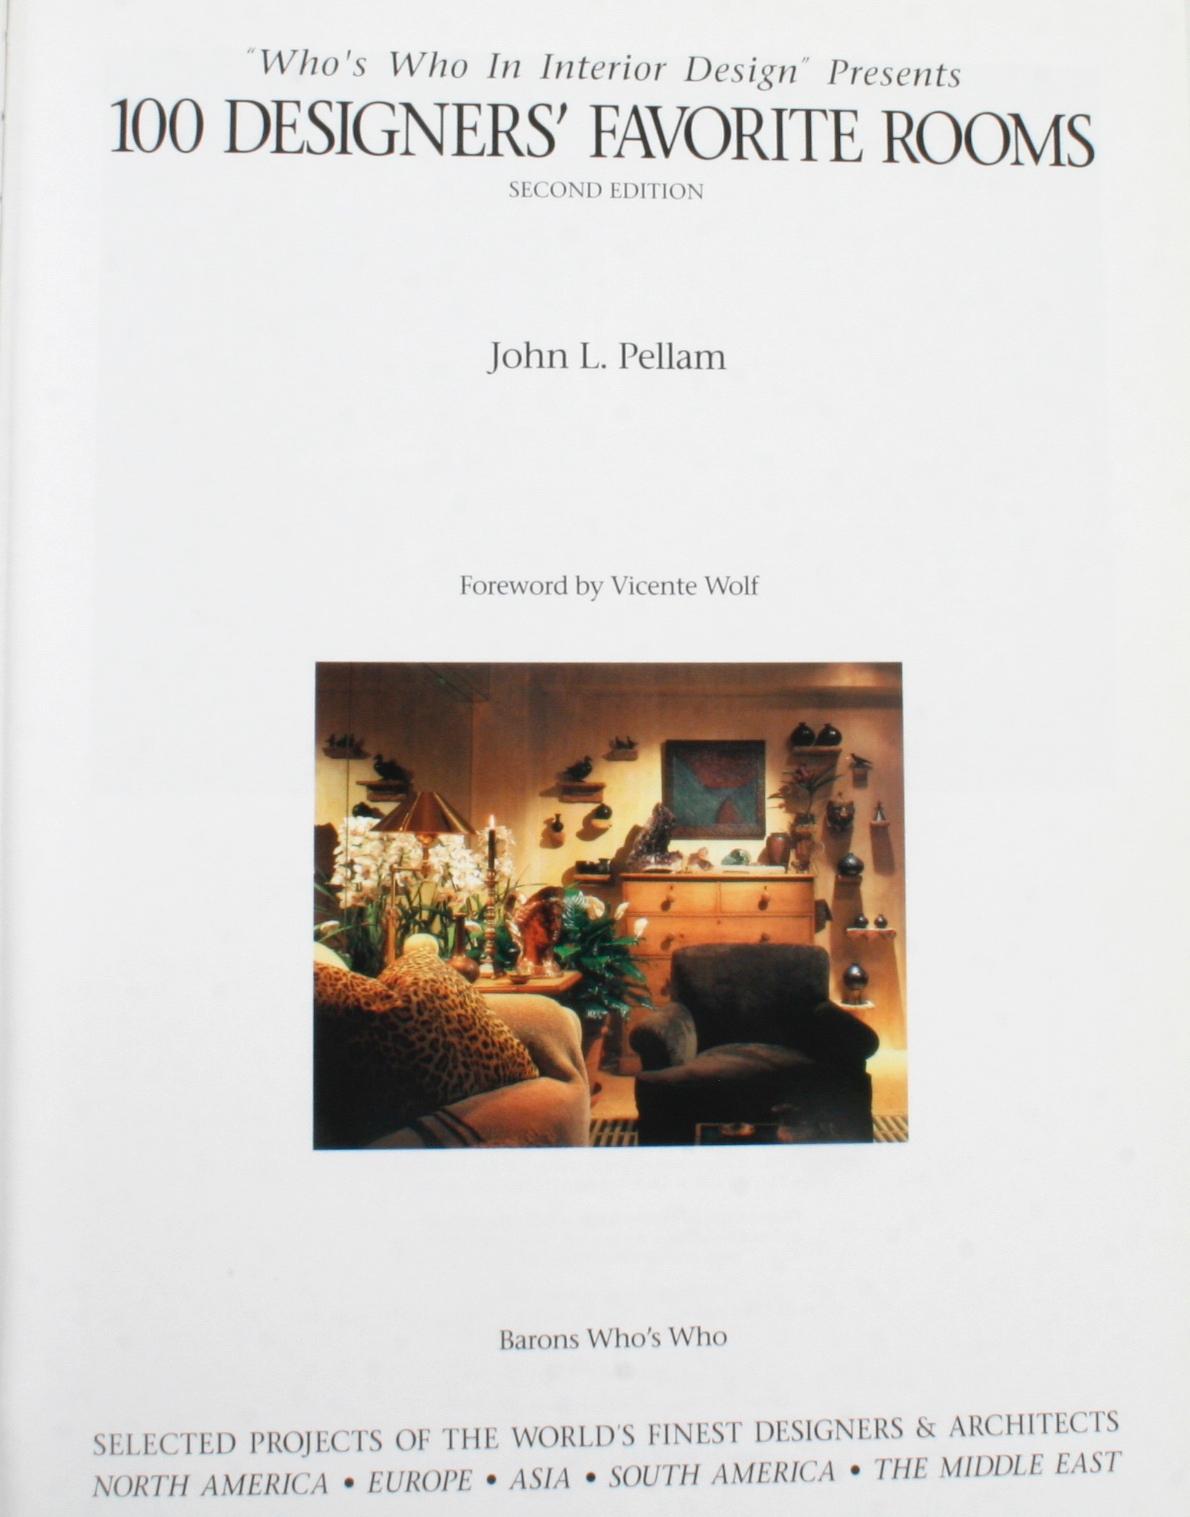 100 Designers' Favorite Rooms by John L. Pellam. Laguna Beach: Baron's Who's Who, 1994. Hardcover with dust jacket. 234 pp. A coffee table book of selected projects by interior designers and architects from North America, Europe, Asia, South America